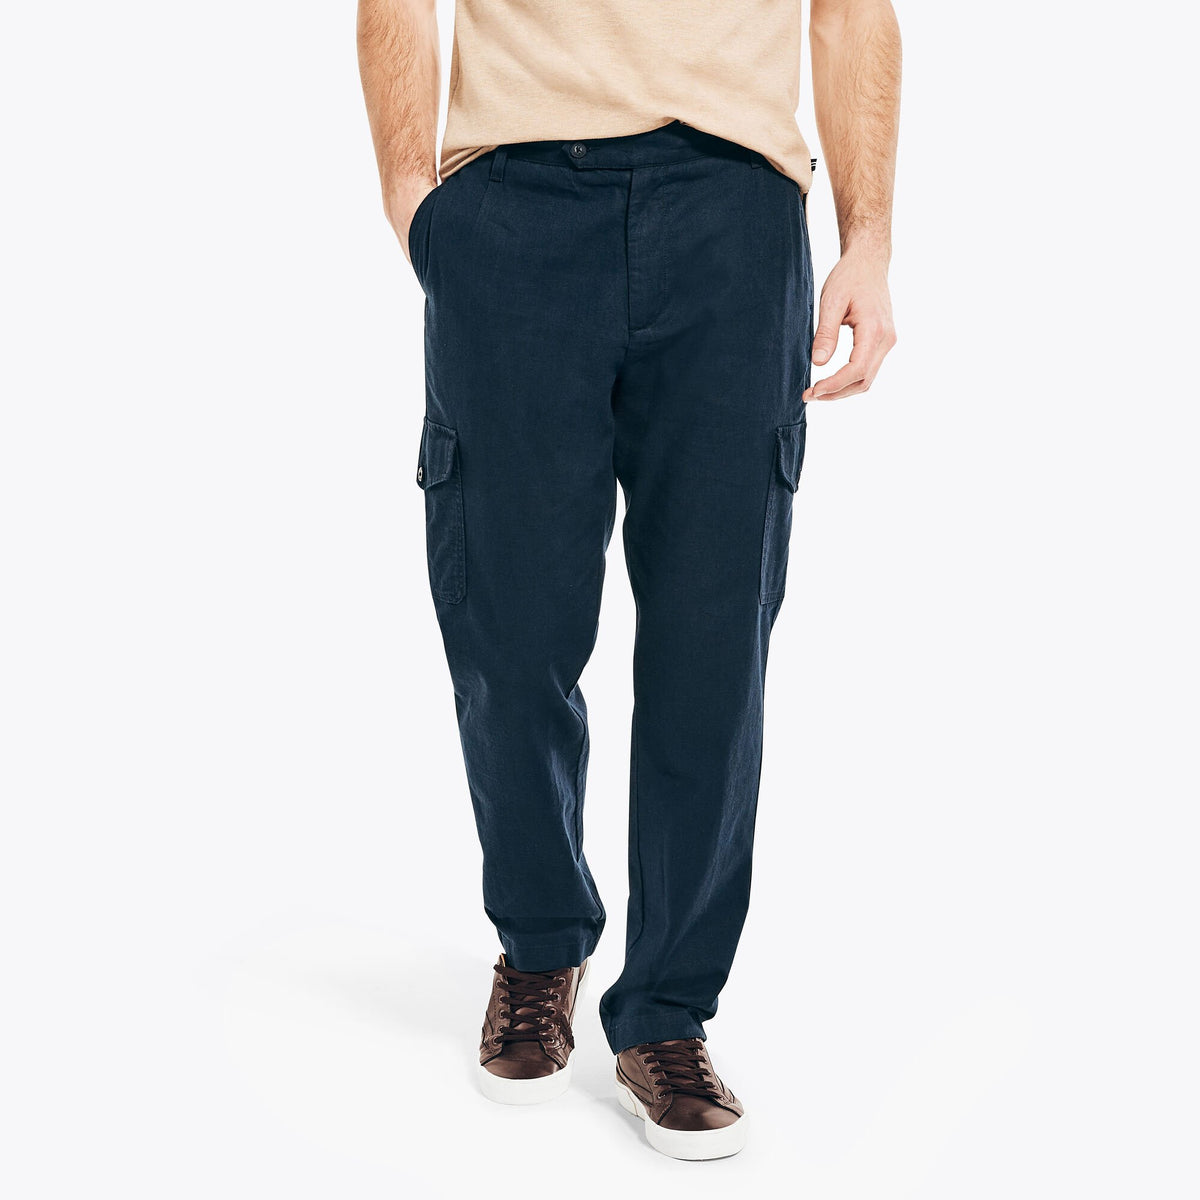 Nautica Men's Sustainably Crafted Cargo Pant Navy